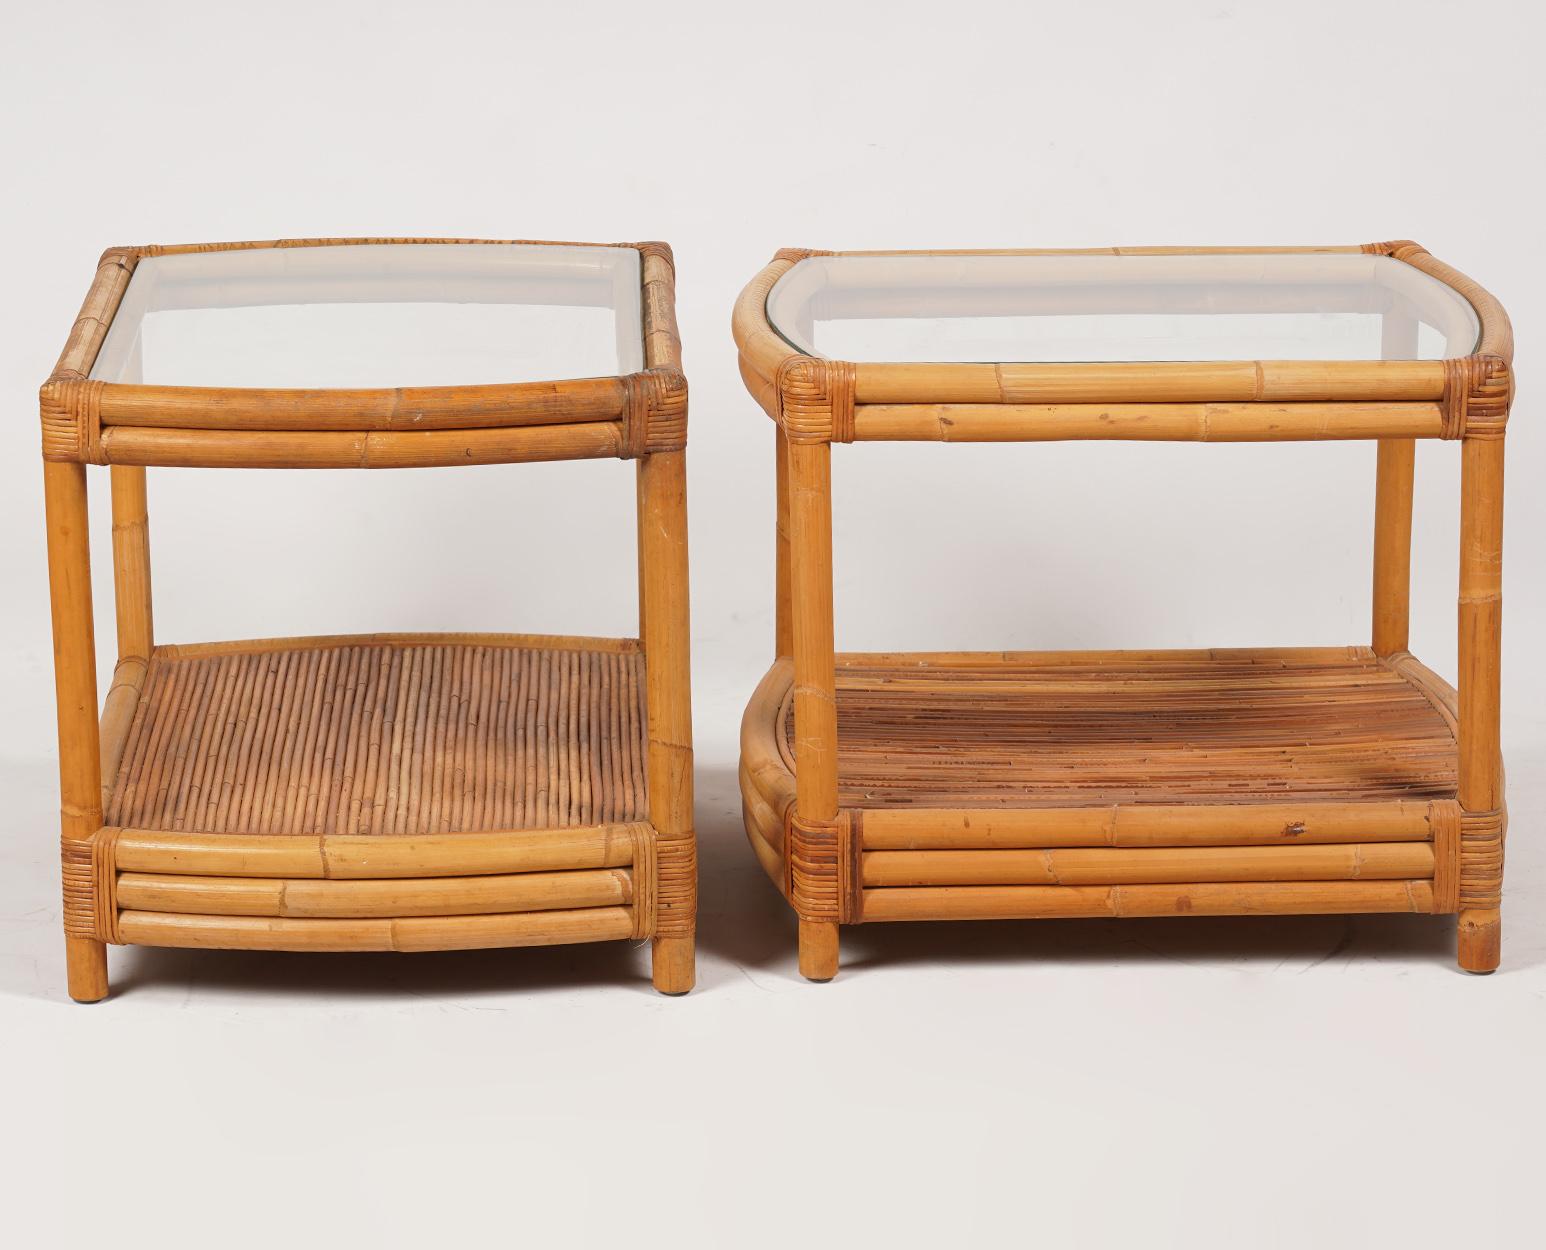 This pair of well designed rattan bamboo side tables feature a shaped glass top above the under tier covered with split pencil reed. The pencil reed, the curved ends and the proportions of the base make them especially attractive.